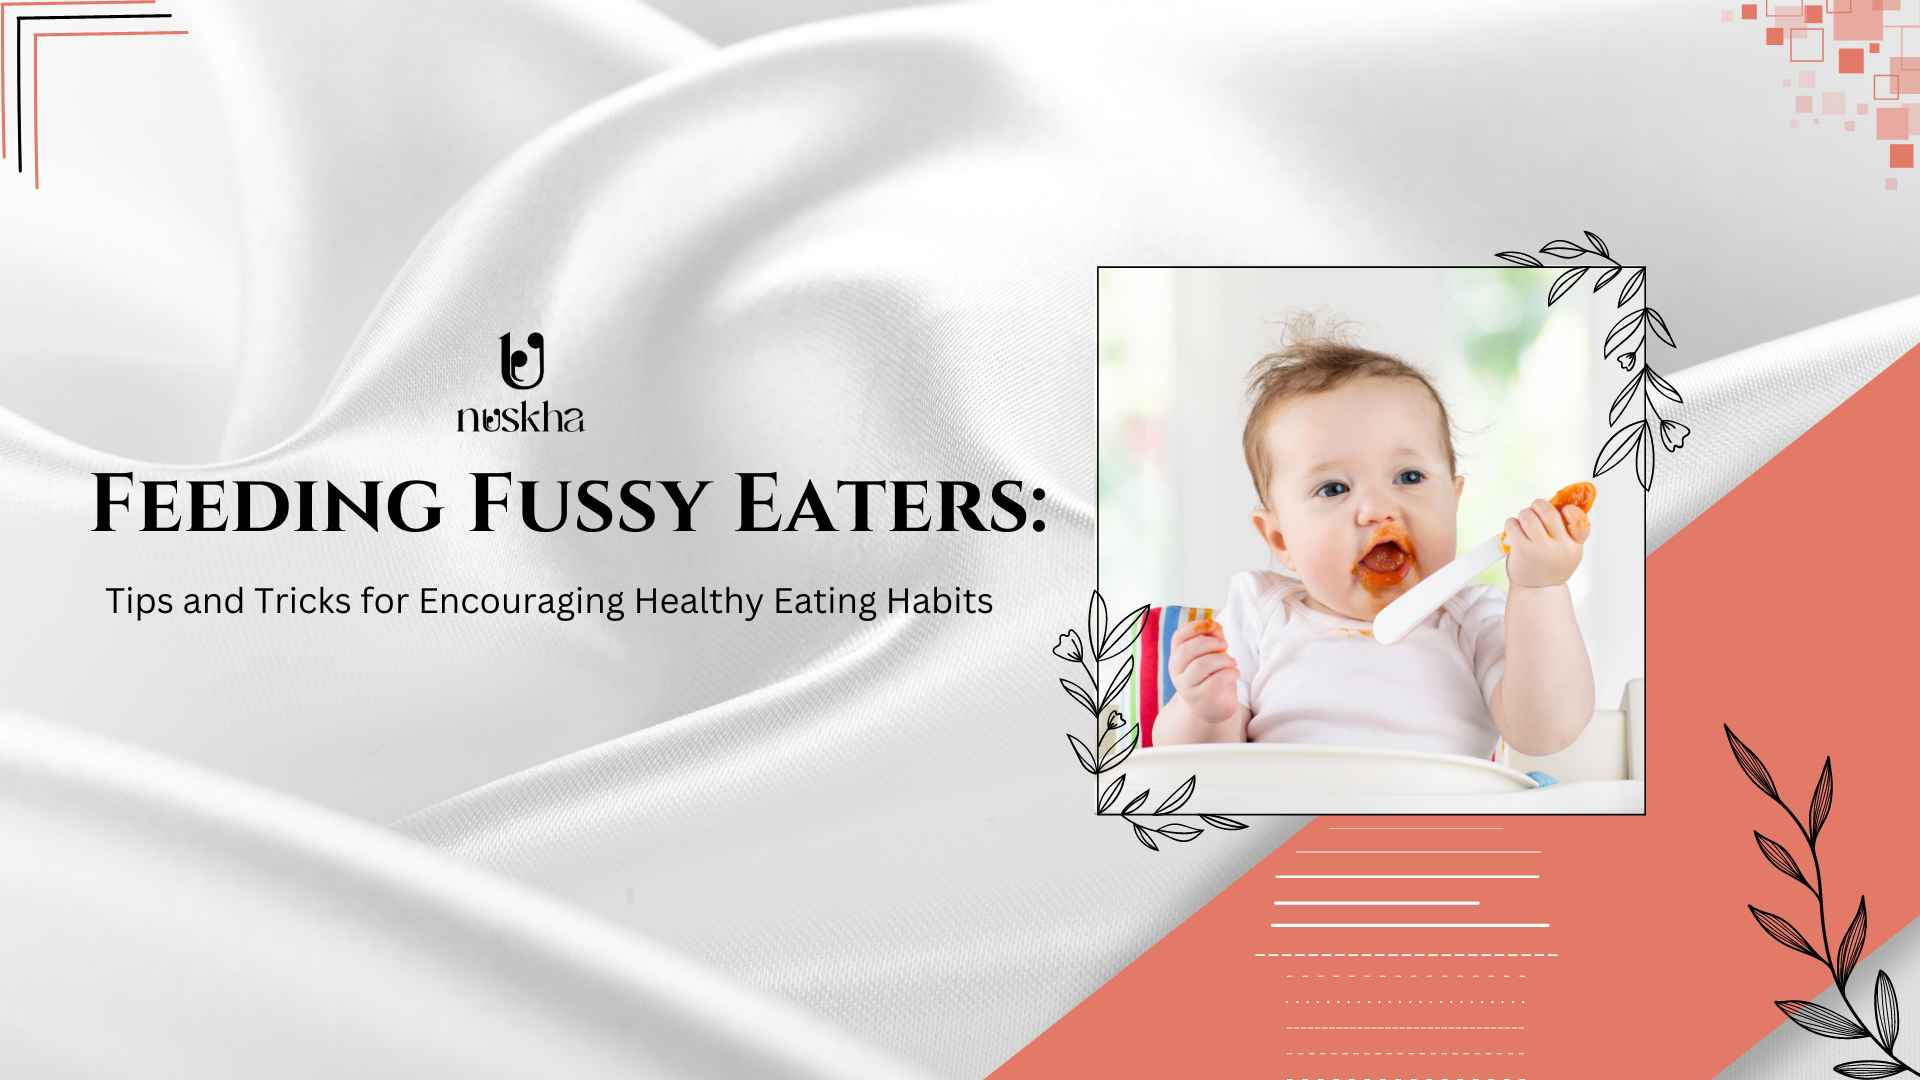 Feeding Fussy Eaters: Tips and Tricks for Encouraging Healthy Eating Habits